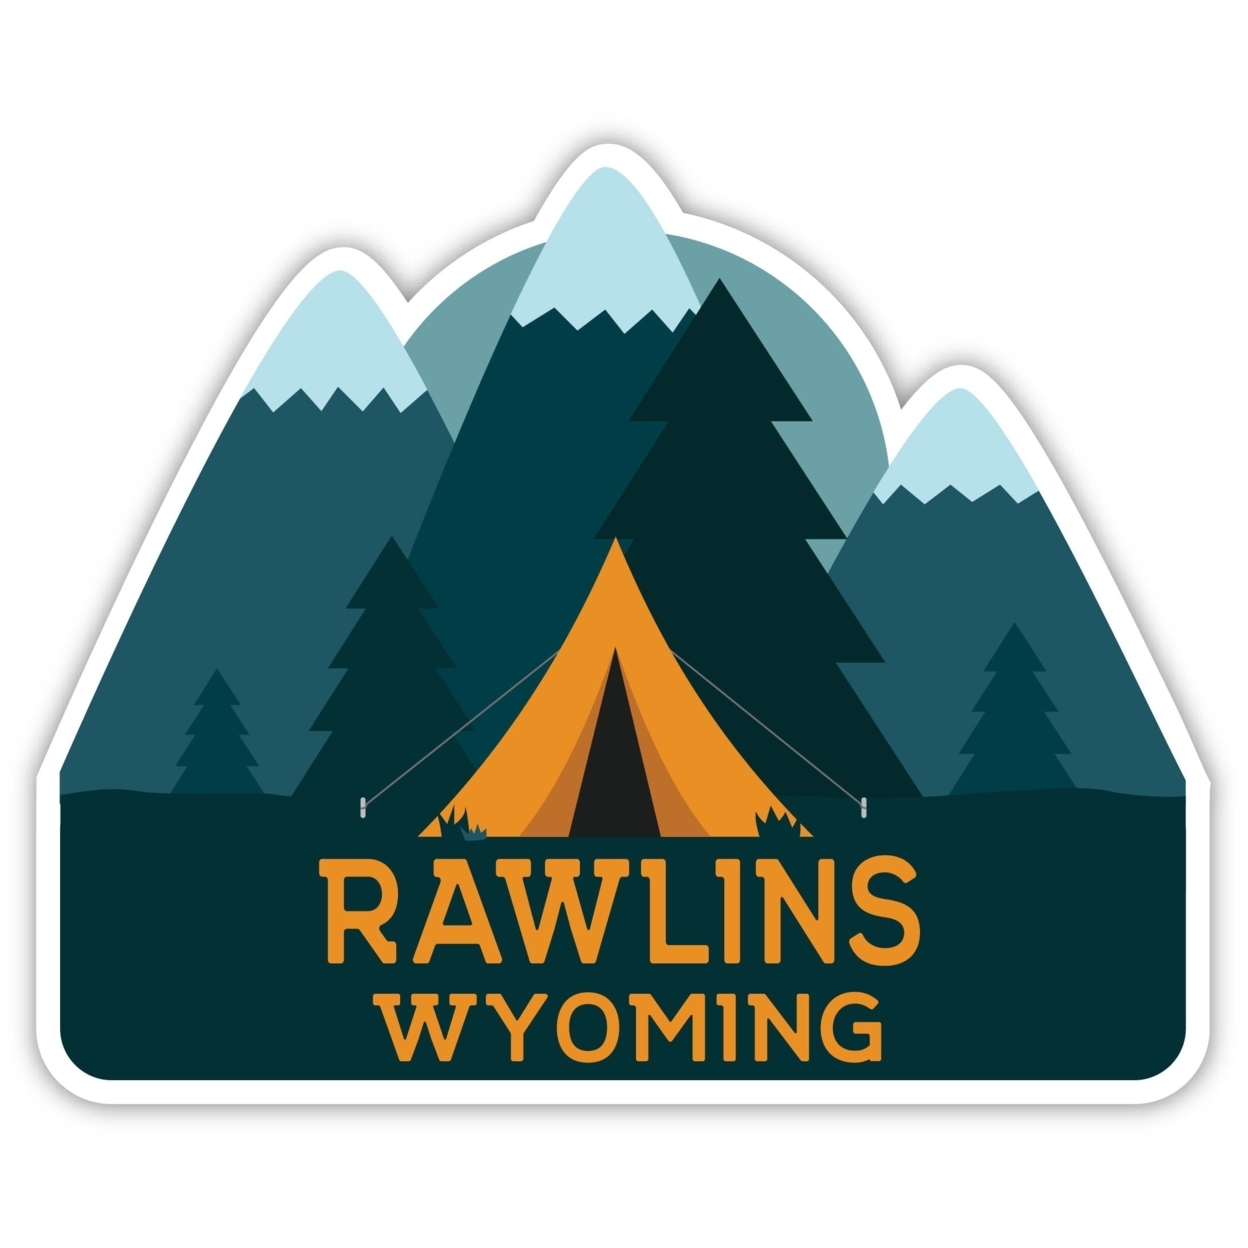 Rawlins Wyoming Souvenir Decorative Stickers (Choose Theme And Size) - Single Unit, 2-Inch, Camp Life